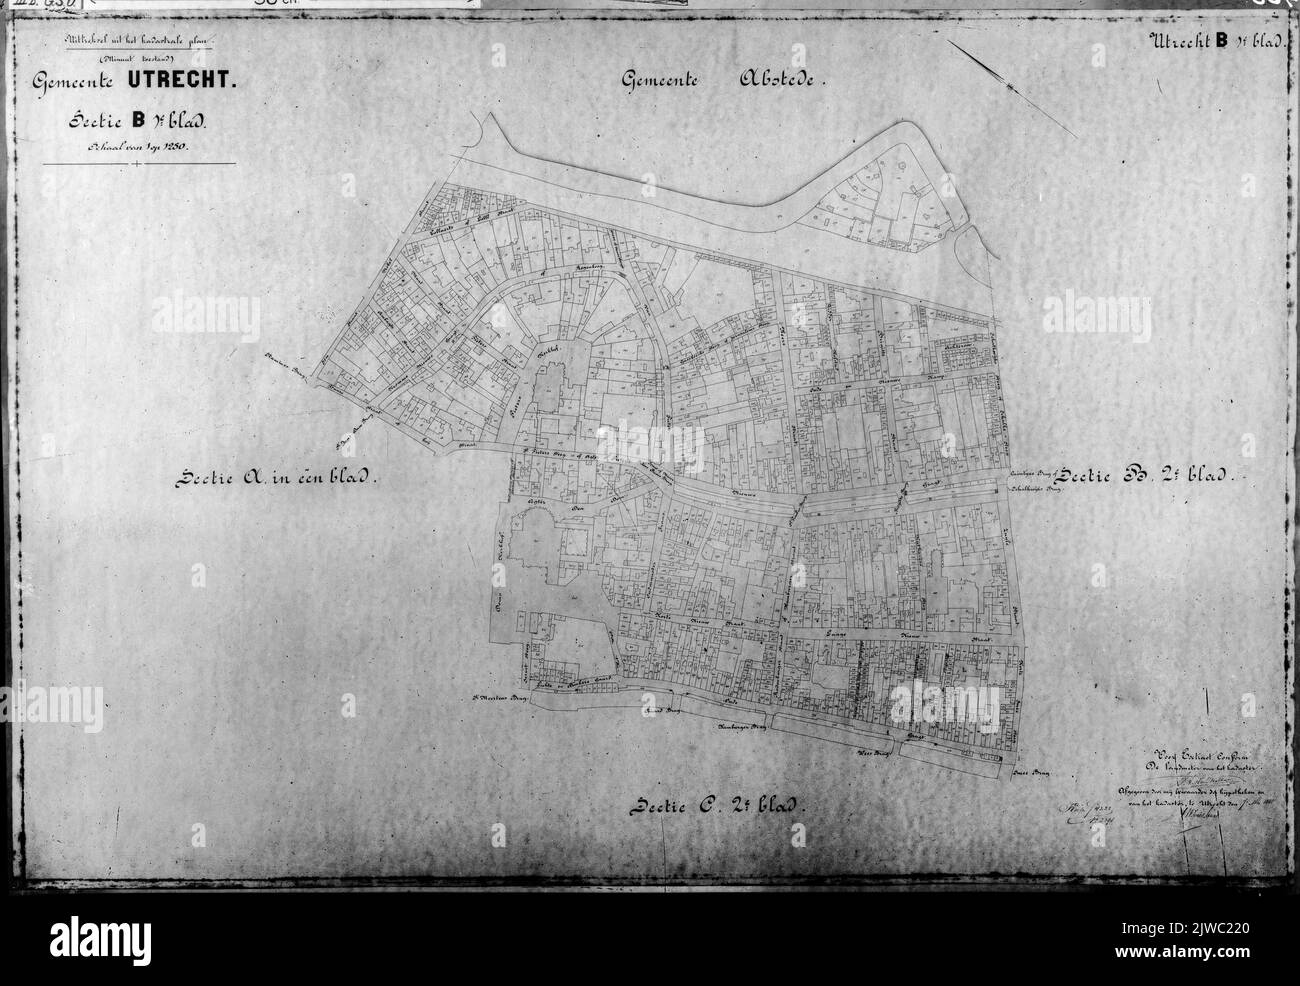 Cadastral map (minute plan) of the municipality of Utrecht, Section B, first magazine with the borders of the land property and the relevant plot numbers in the area that is roughly bordered by Lange Jansstraat/ Nobelstraat/ Stadsbuitengracht/ Schalkwijkstraat/ Oudegracht and Domplein. Stock Photo